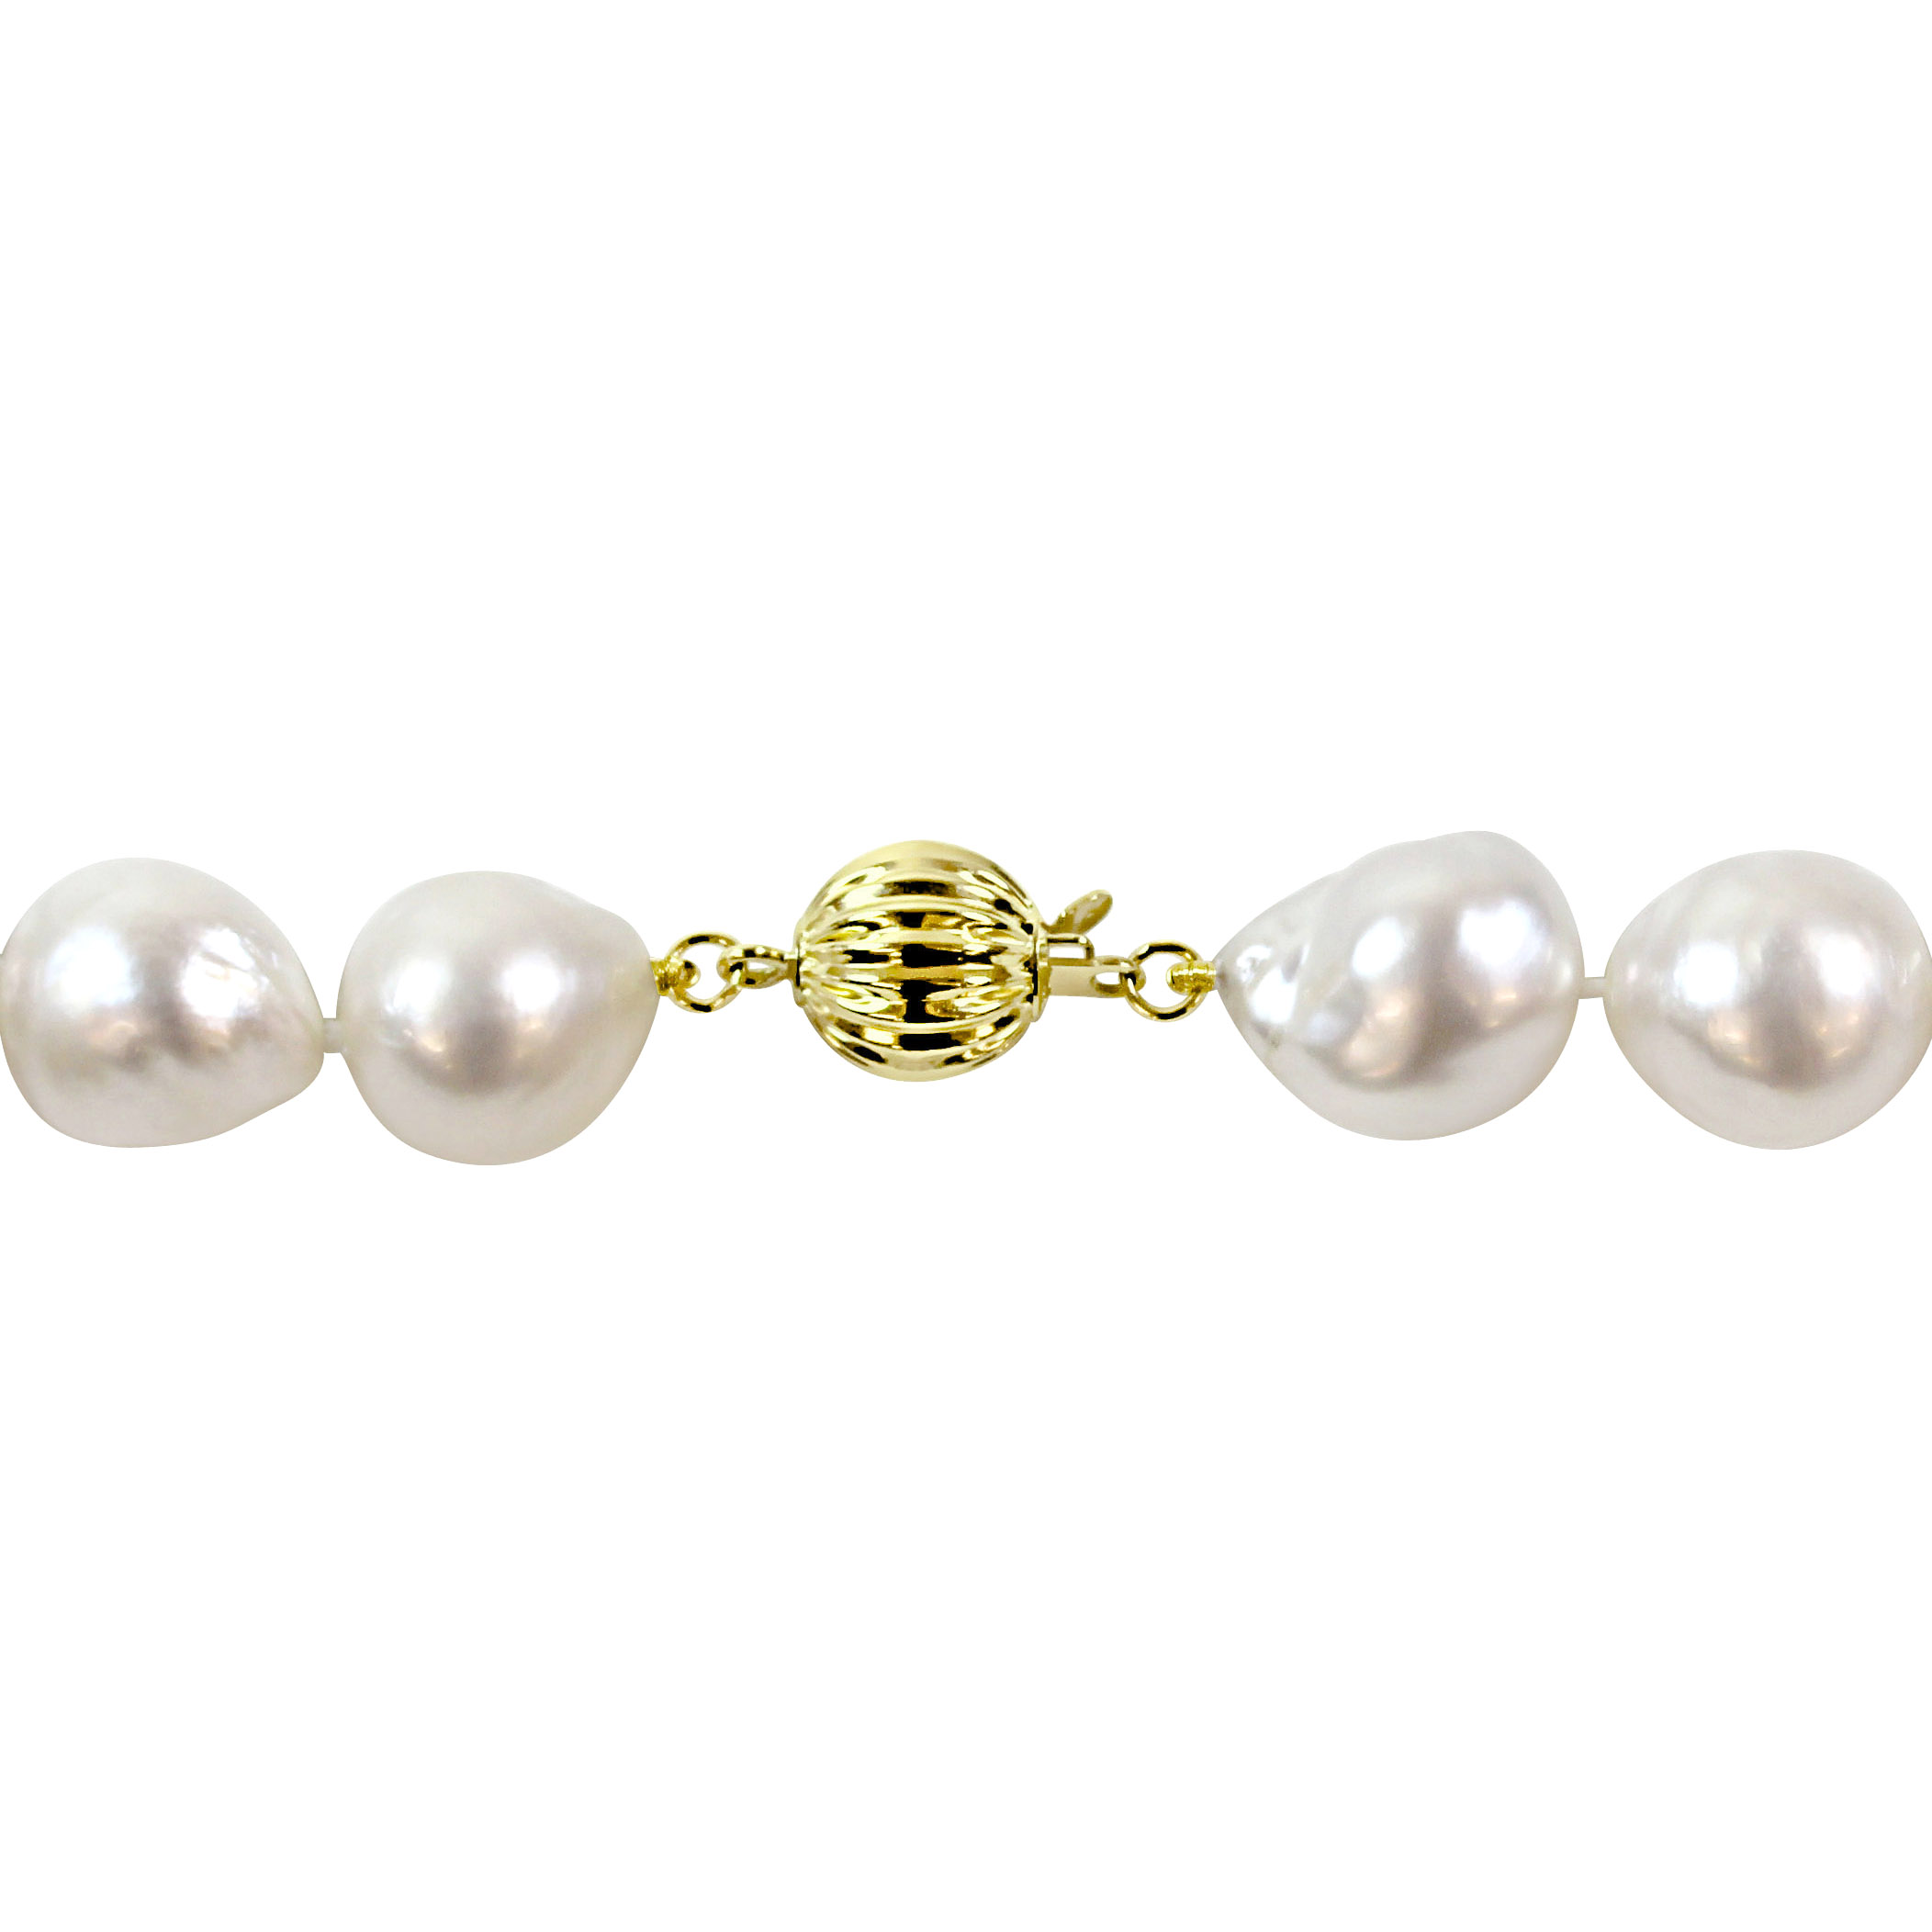 10-13 MM Natural Shape White South Sea Pearl Strand Necklace with 14k Yellow Gold Clasp - 18 in